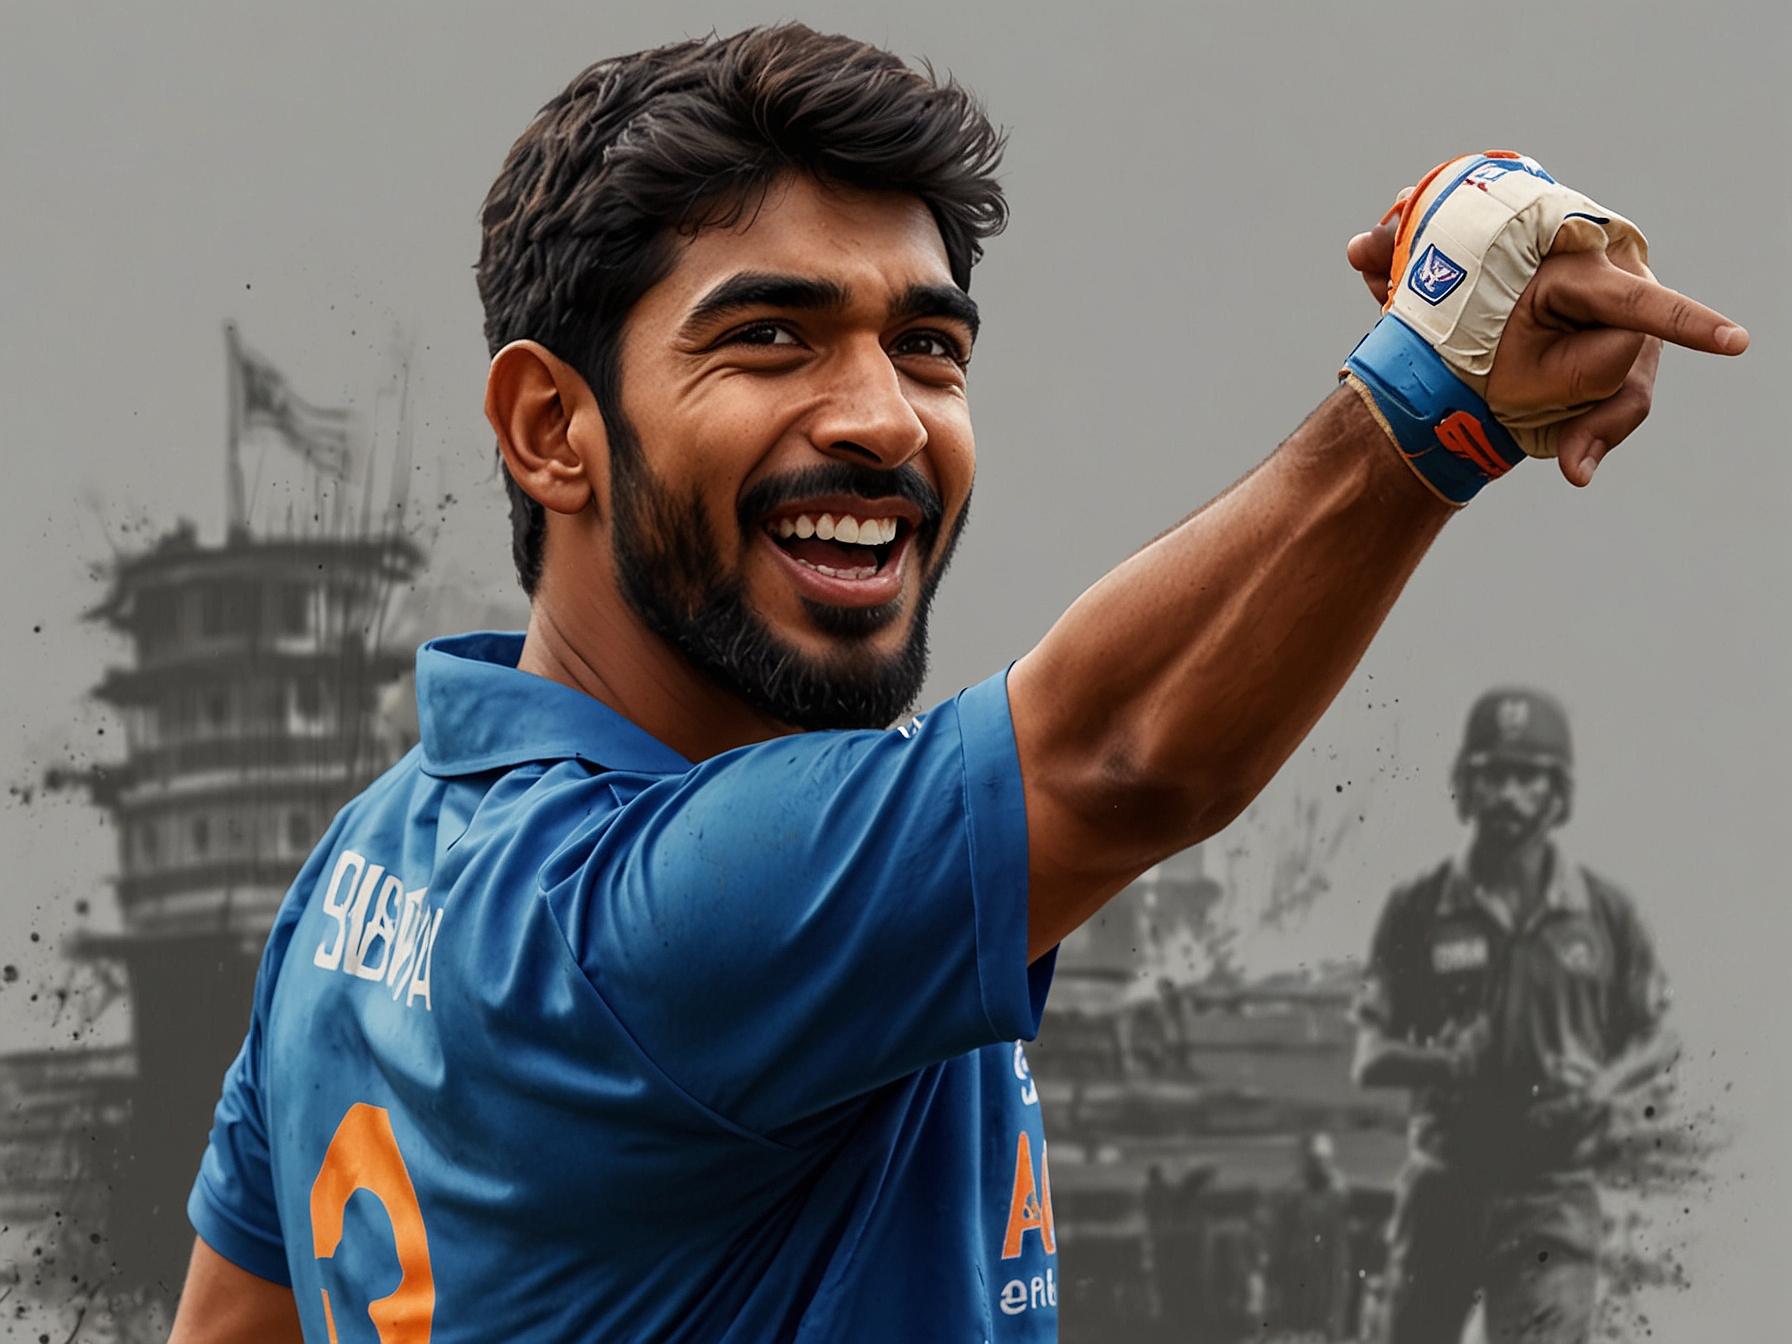 Jasprit Bumrah delivers a crucial yorker, stifling the Afghan batting lineup and securing India's position in the tournament, showcasing his return to form after injury.